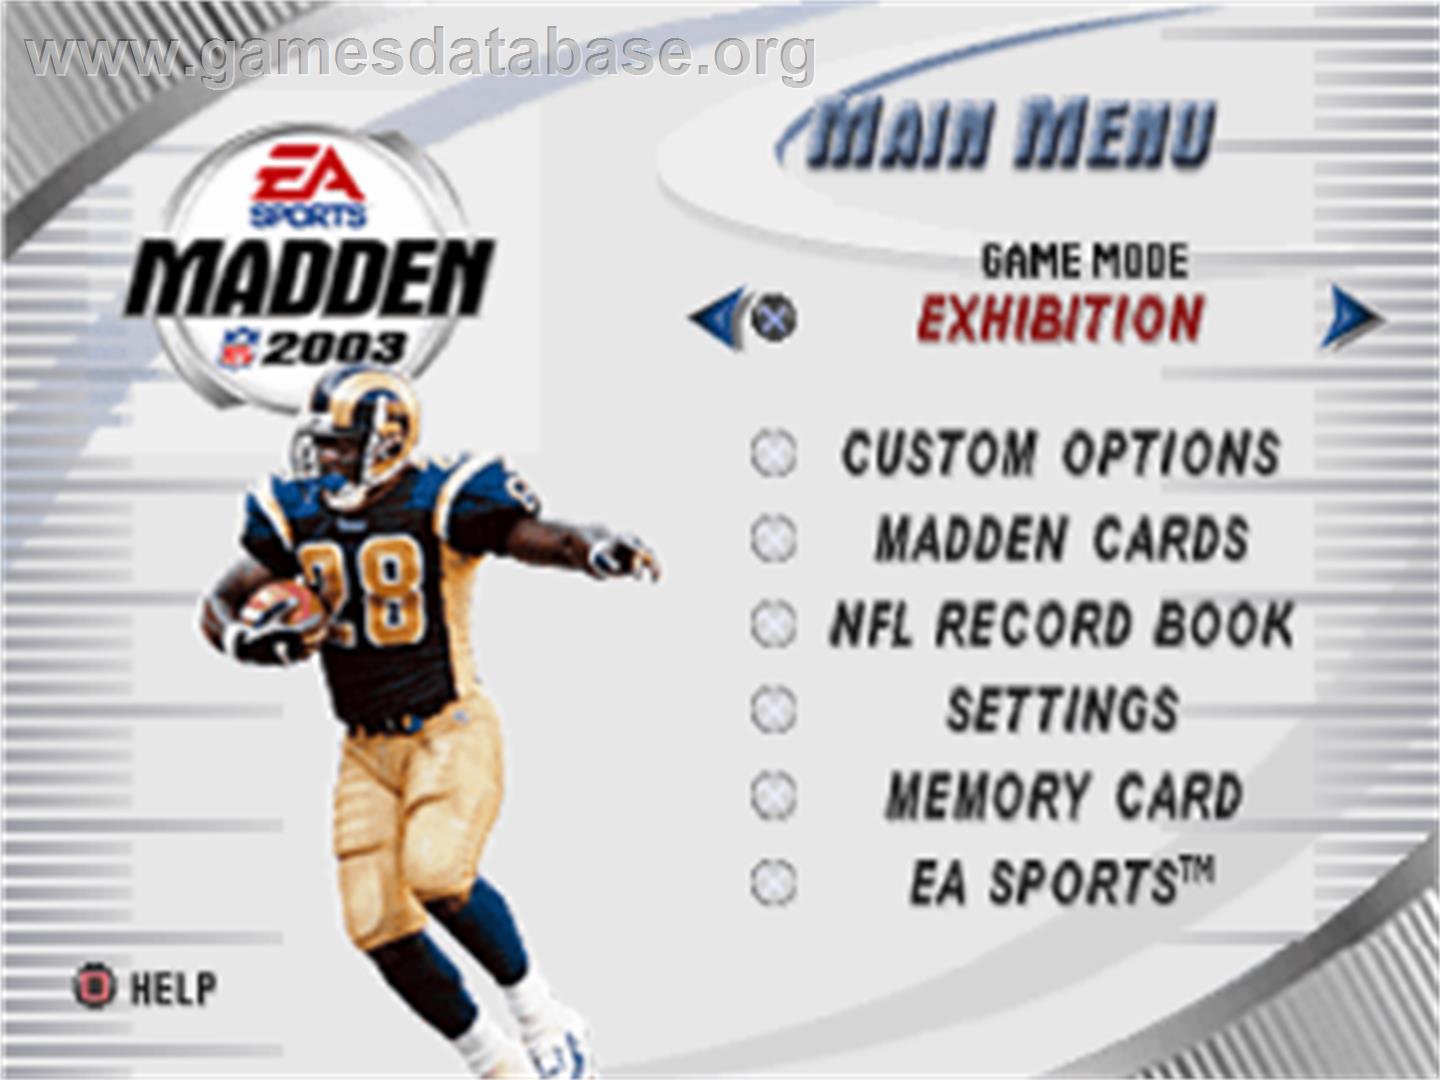 Madden NFL 2003 - Sony Playstation - Artwork - Title Screen